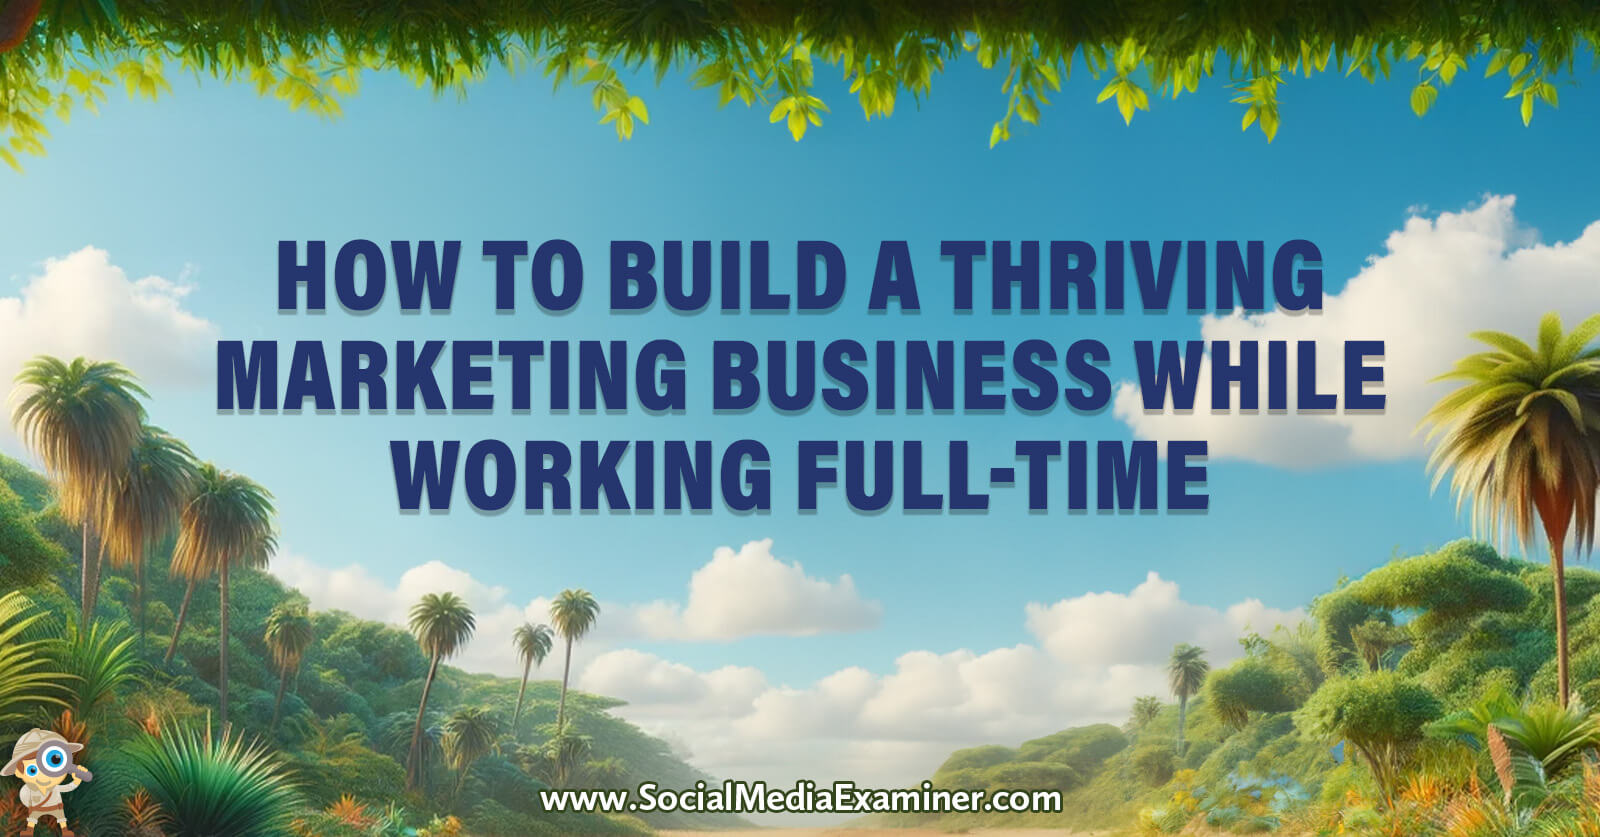 How to Build a Thriving Marketing Business While Working Full-Time by Social Media Examiner